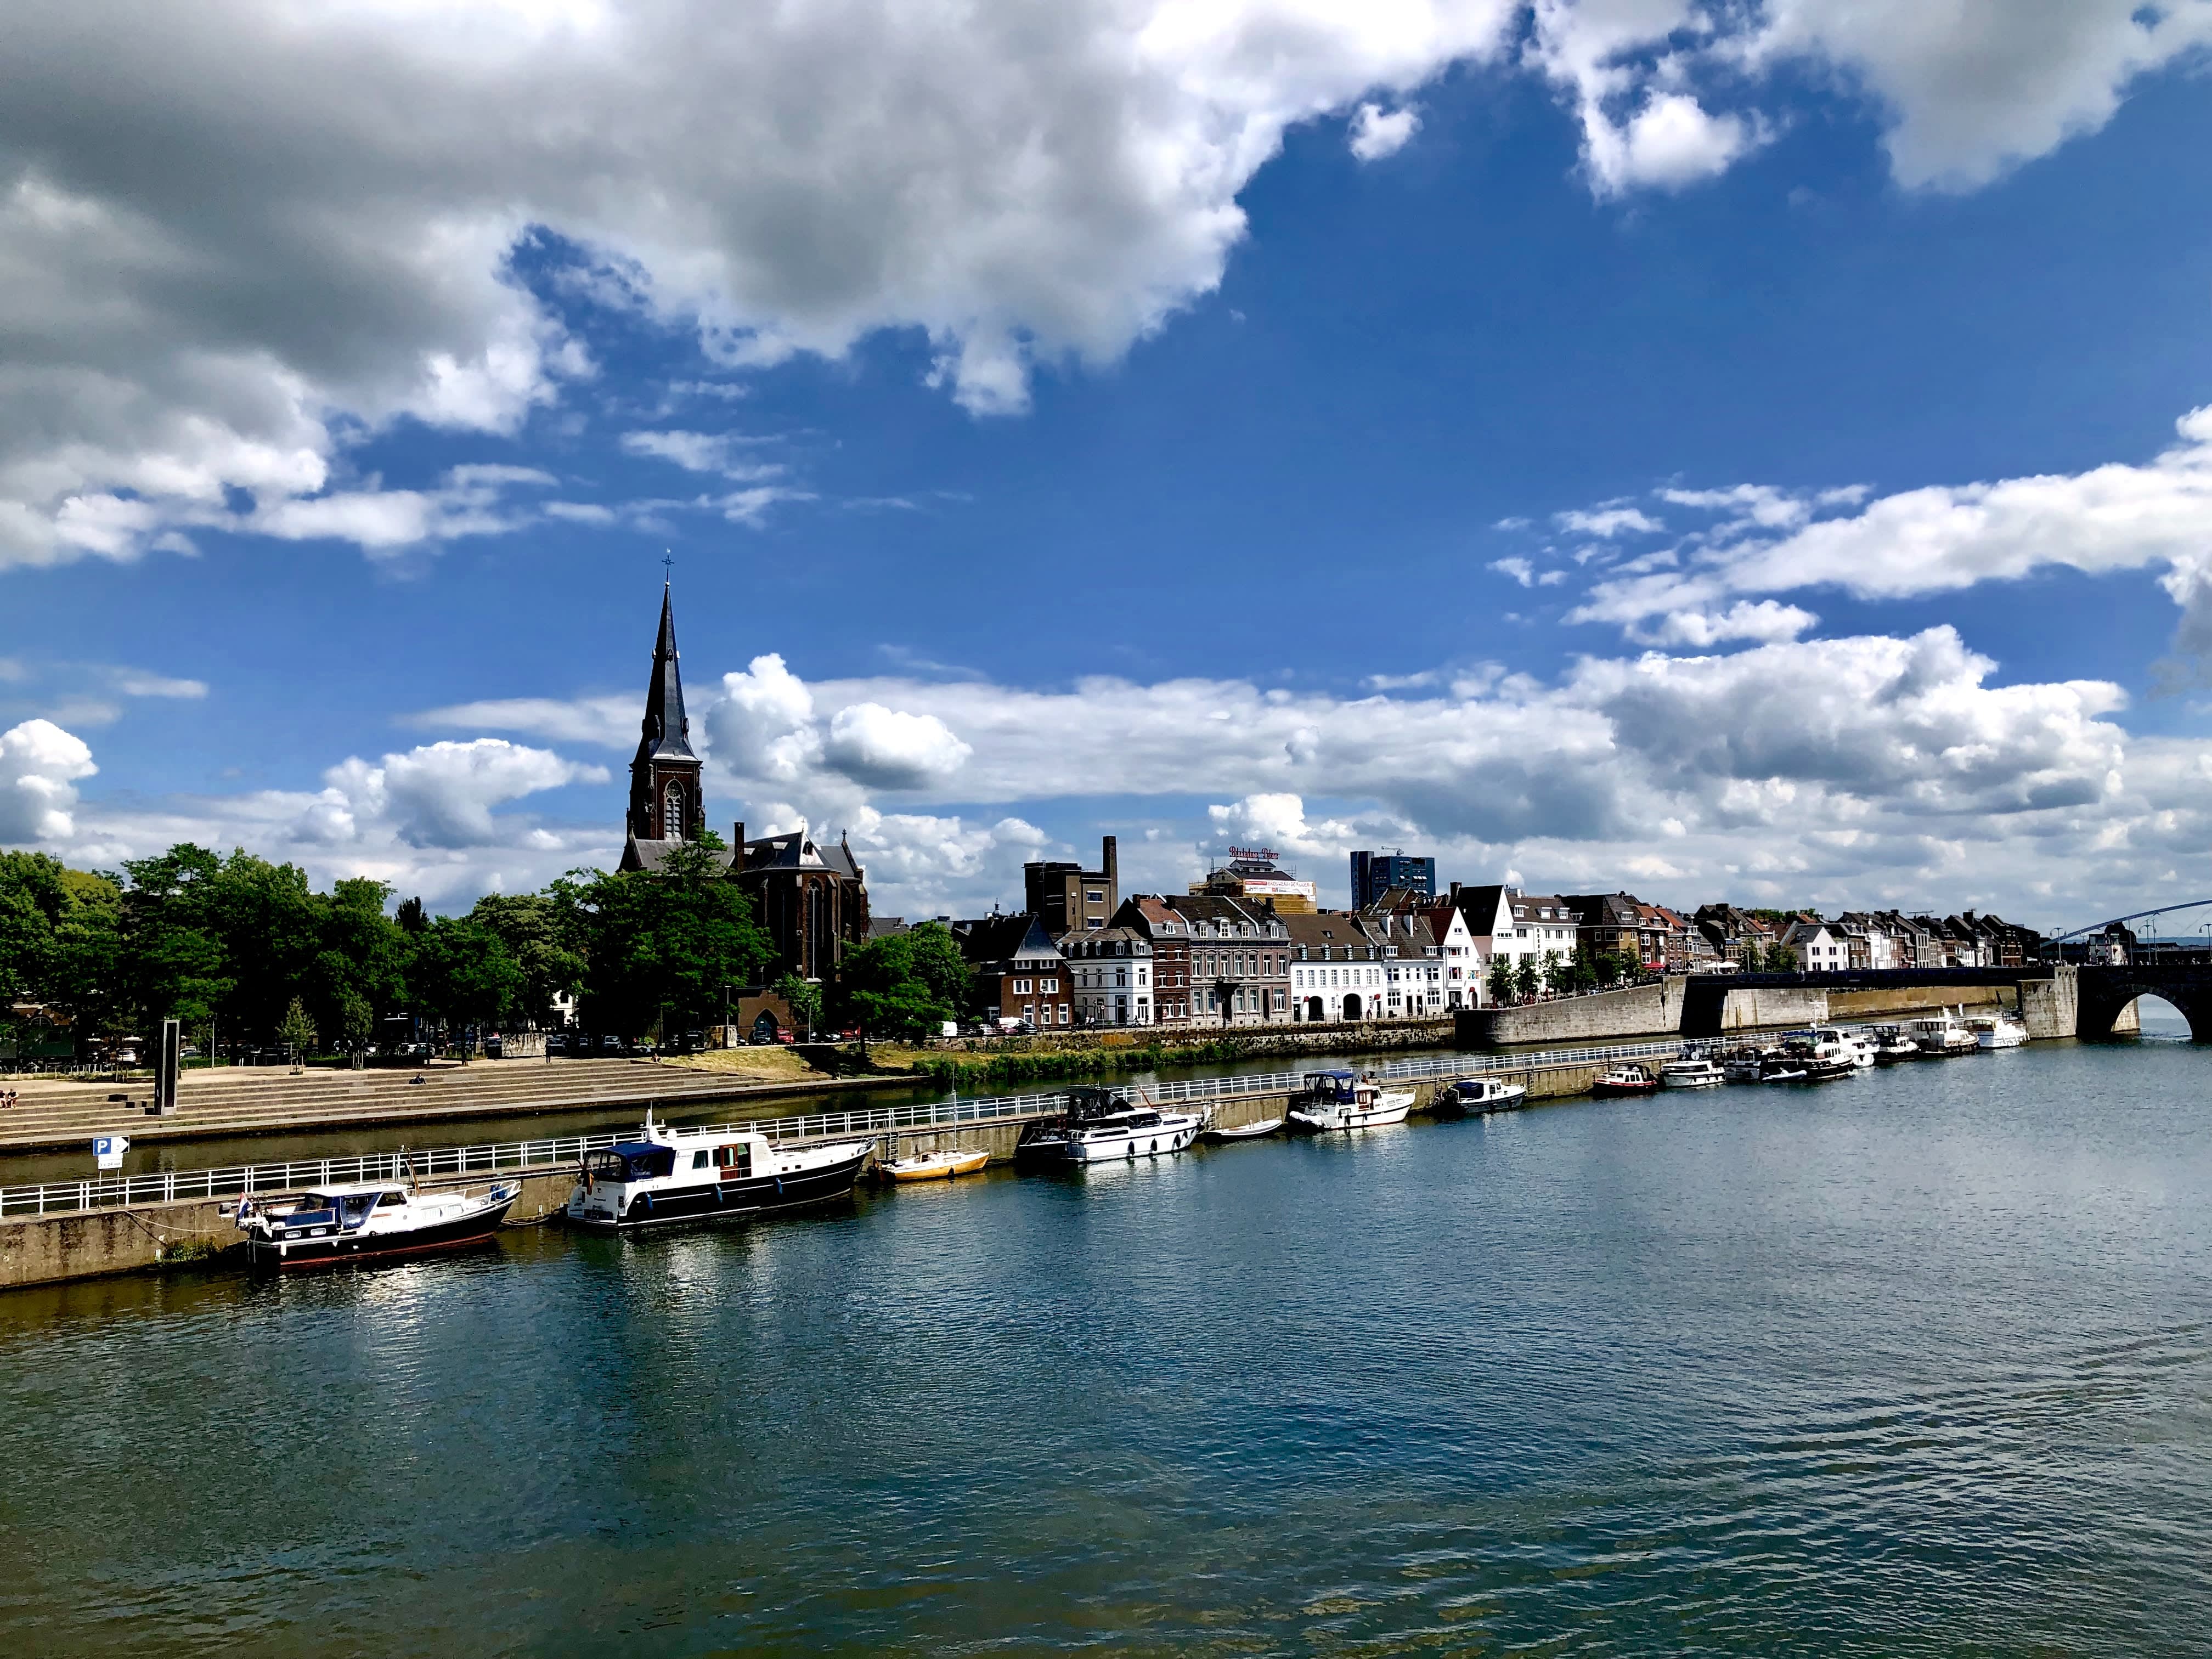 View of Maastricht and the river Maas